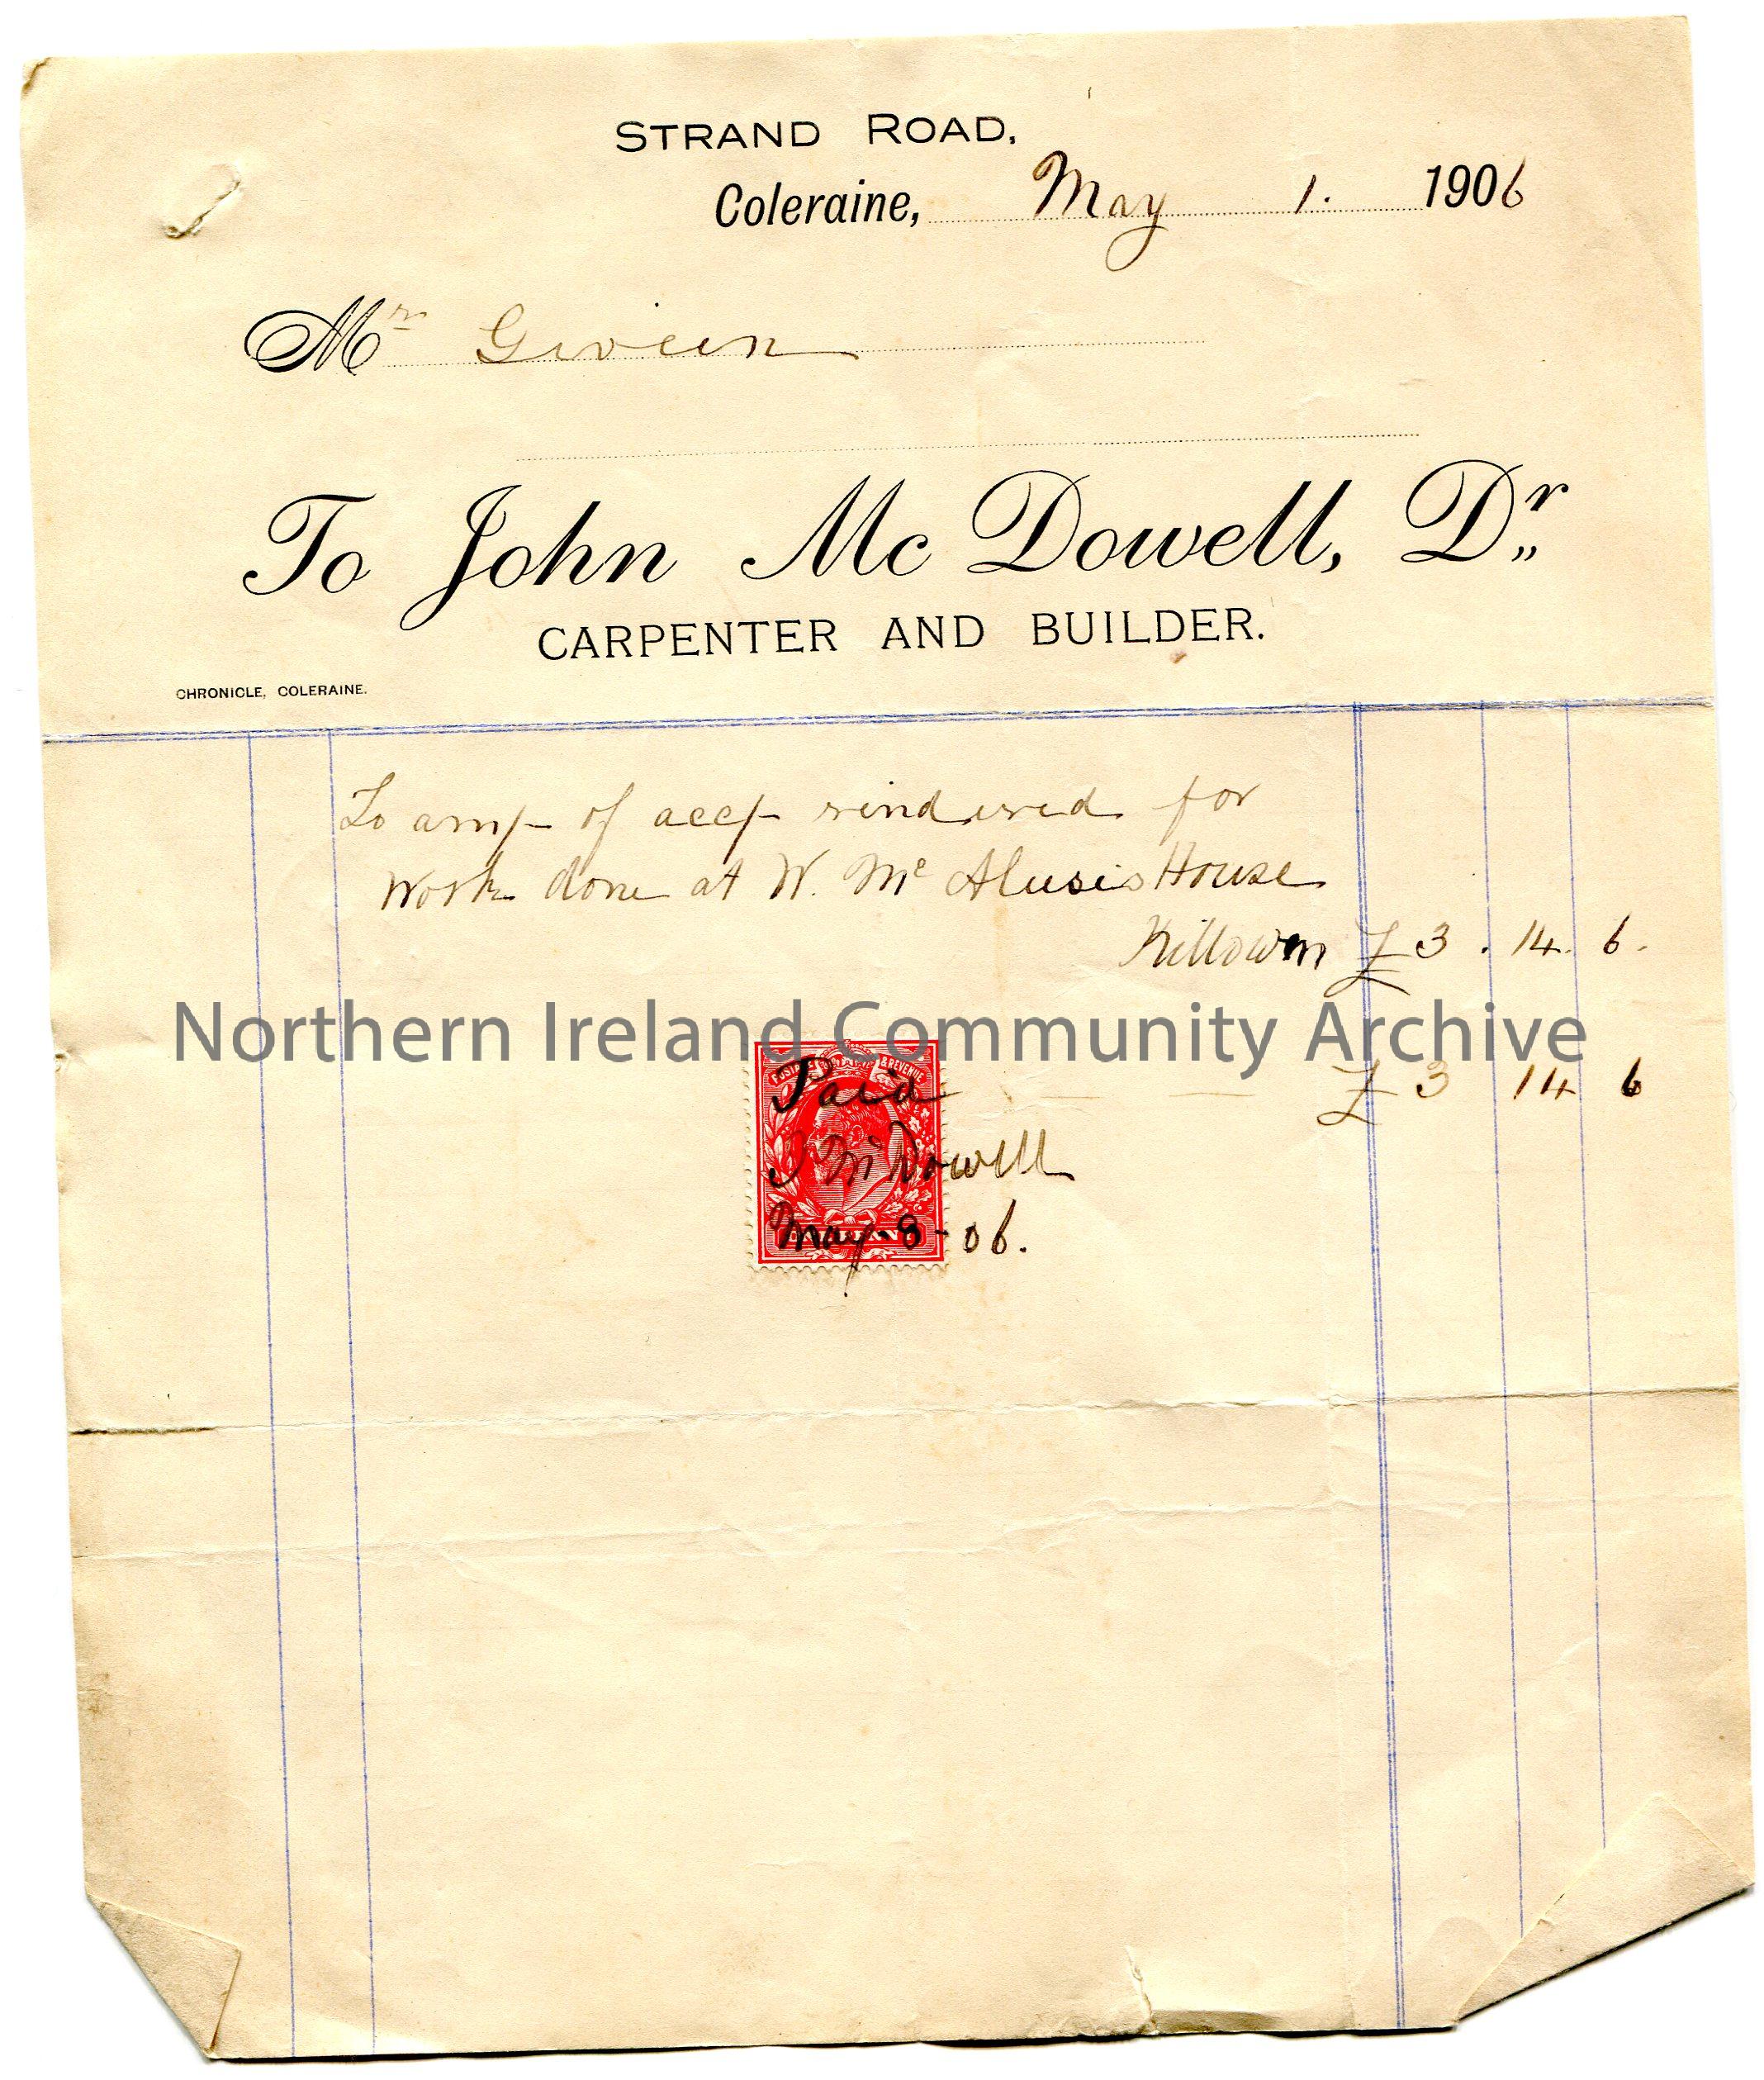 Handwritten receipt to Mr Given from John McDowell, carpenter and builder, Strand Road. Receipt dated 1st May, 1906. For work at W. McAlusis? house, K…